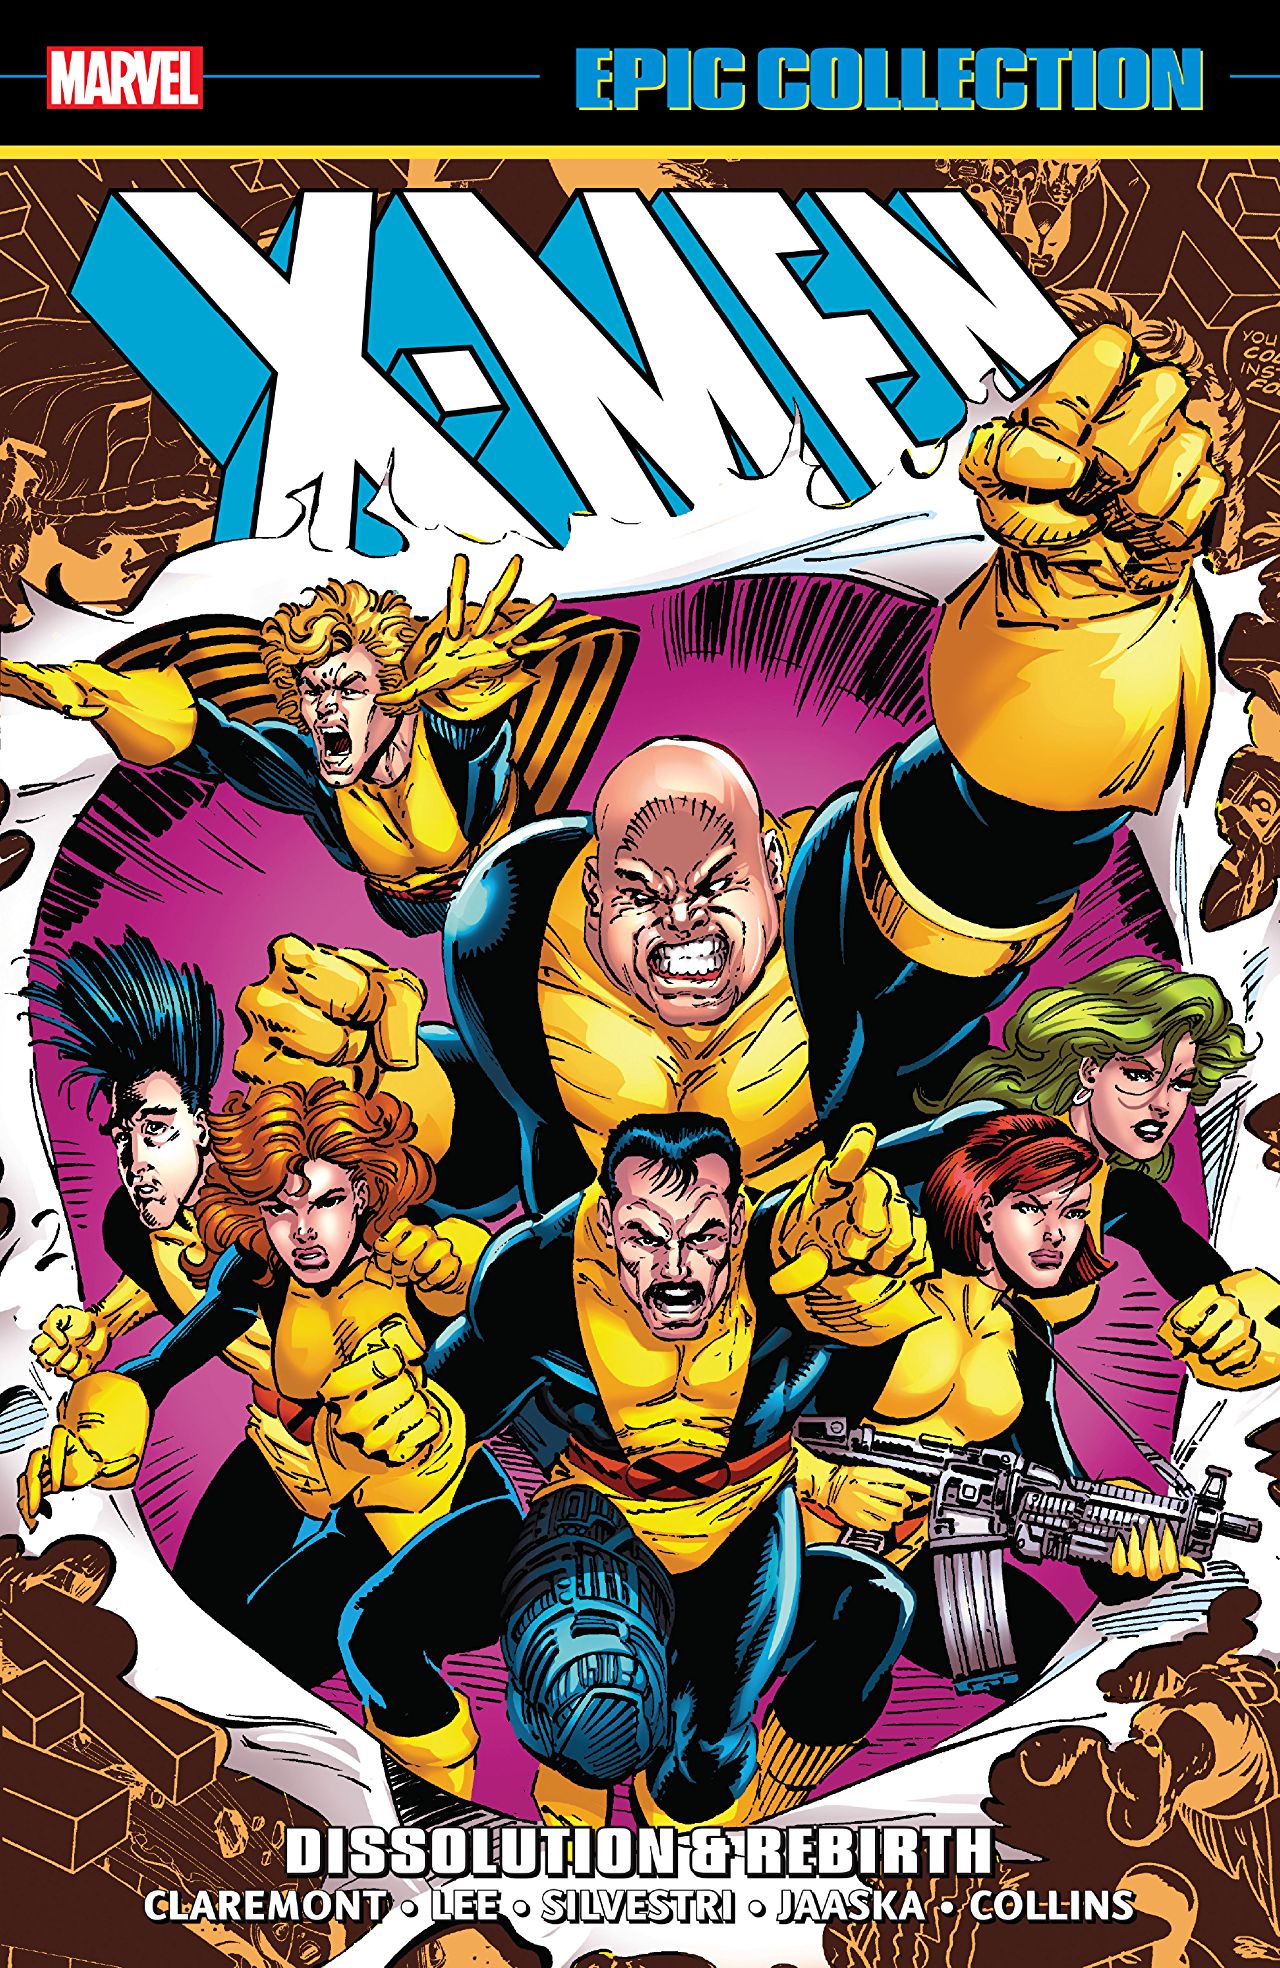 Convos with Creators: Chatting Iron Fist with Chris Claremont – I AM IRON  FIST